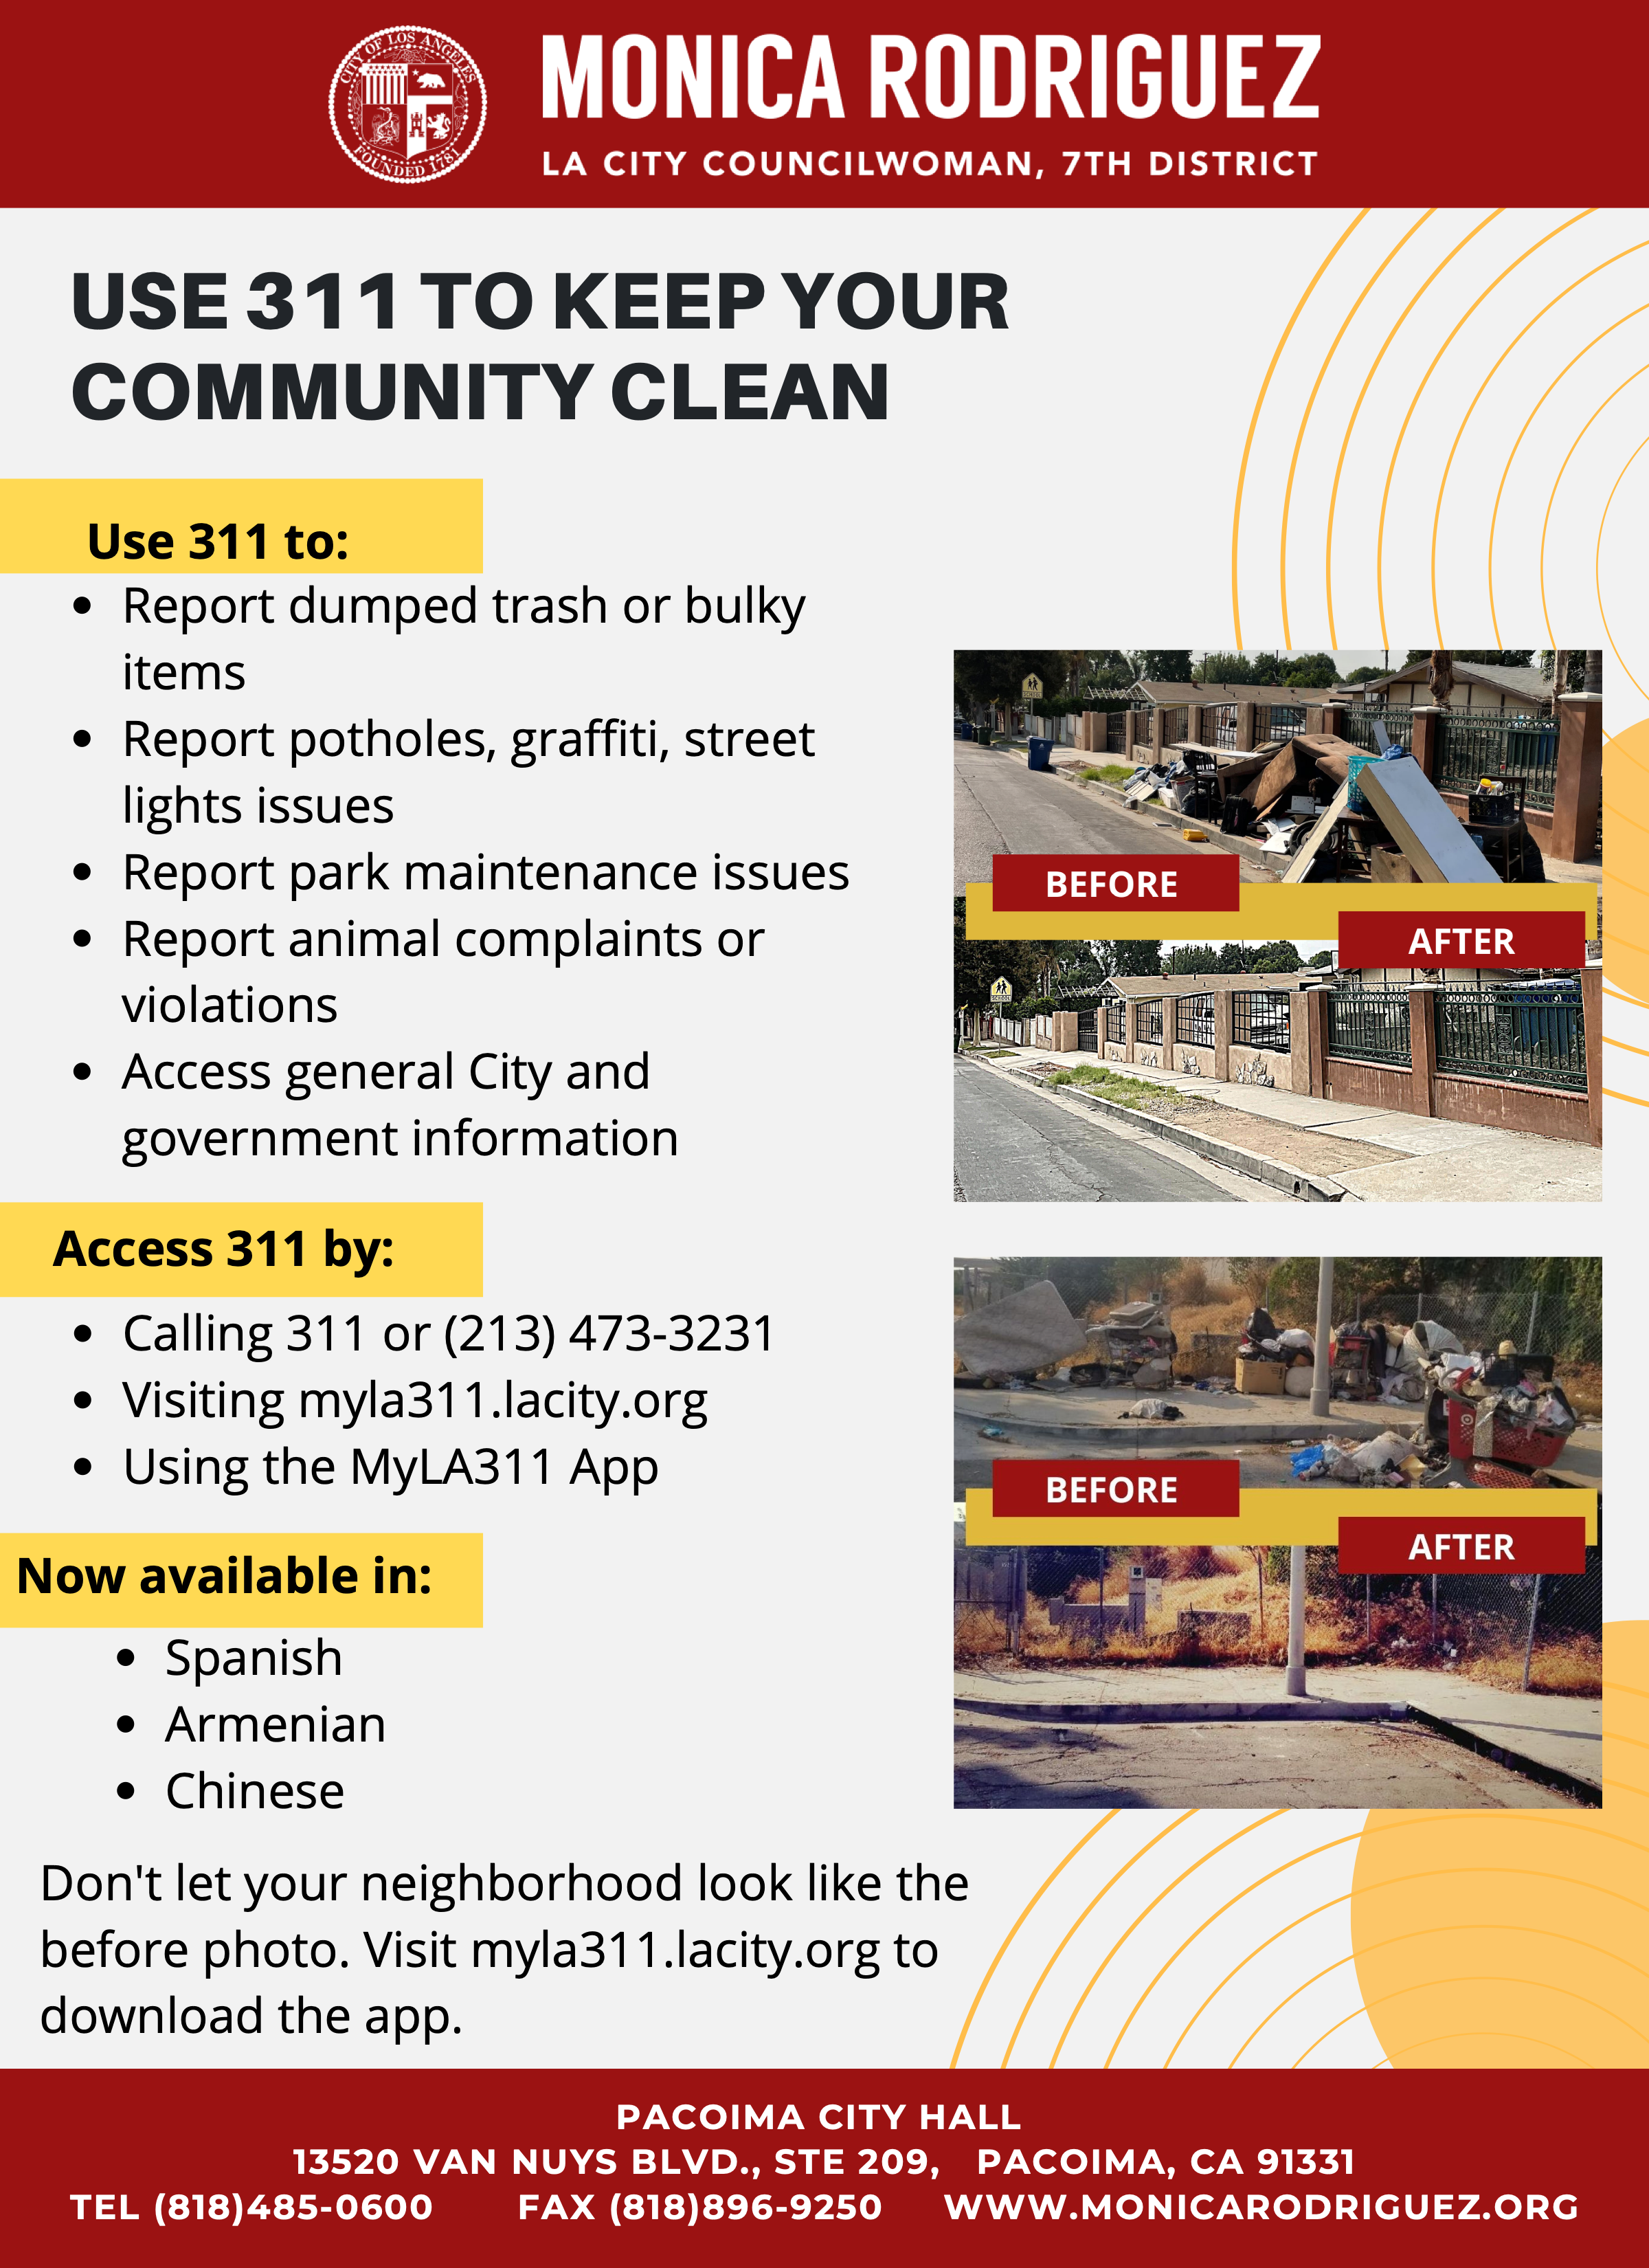 Use 311 to Keep Community Clean